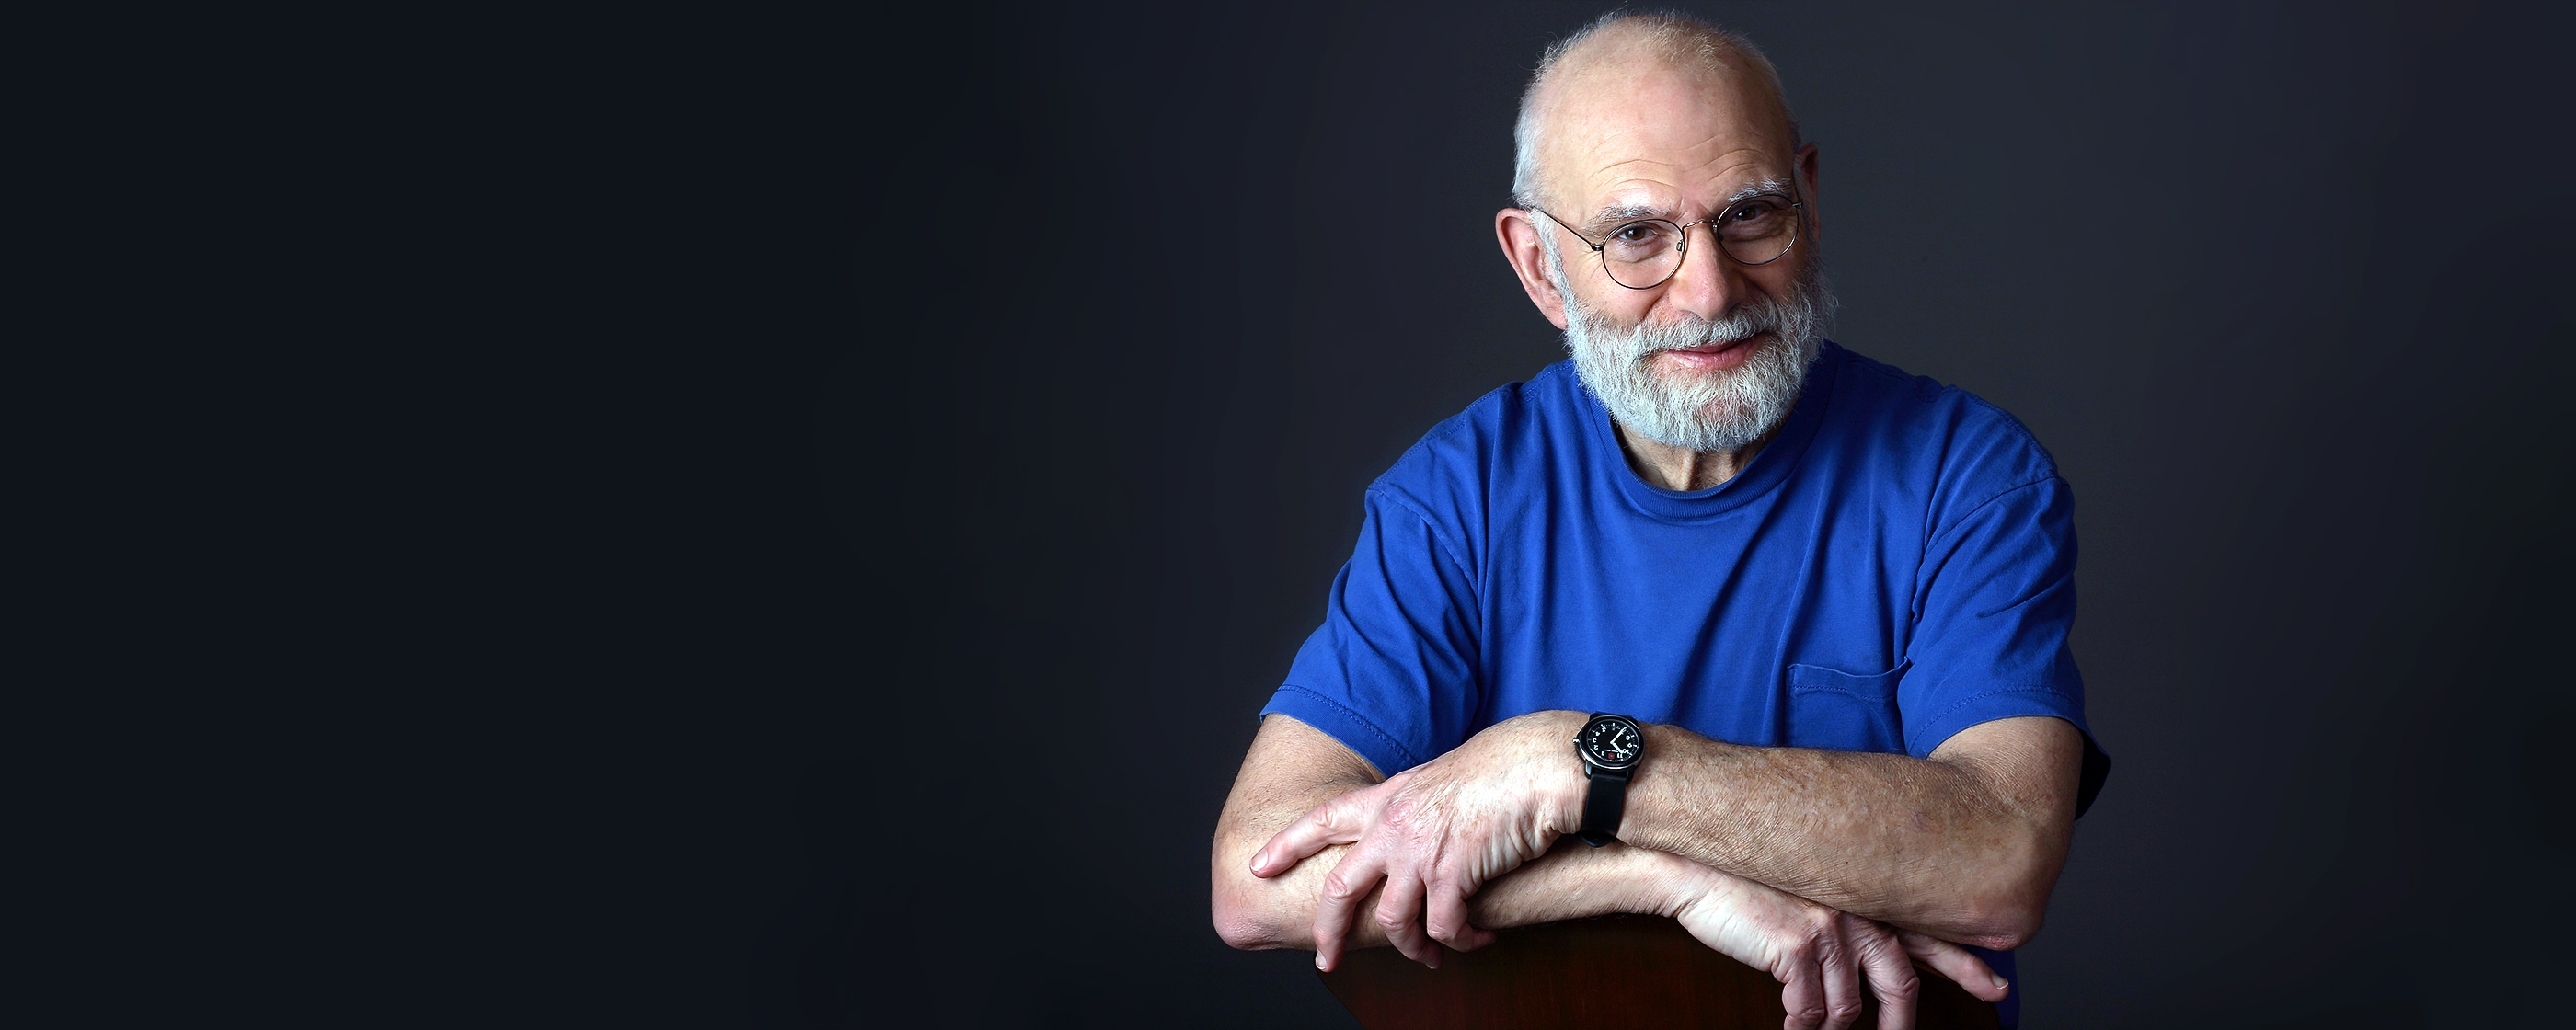 Neurologist Oliver Sacks' legacy and final days explored in 'His Own Life